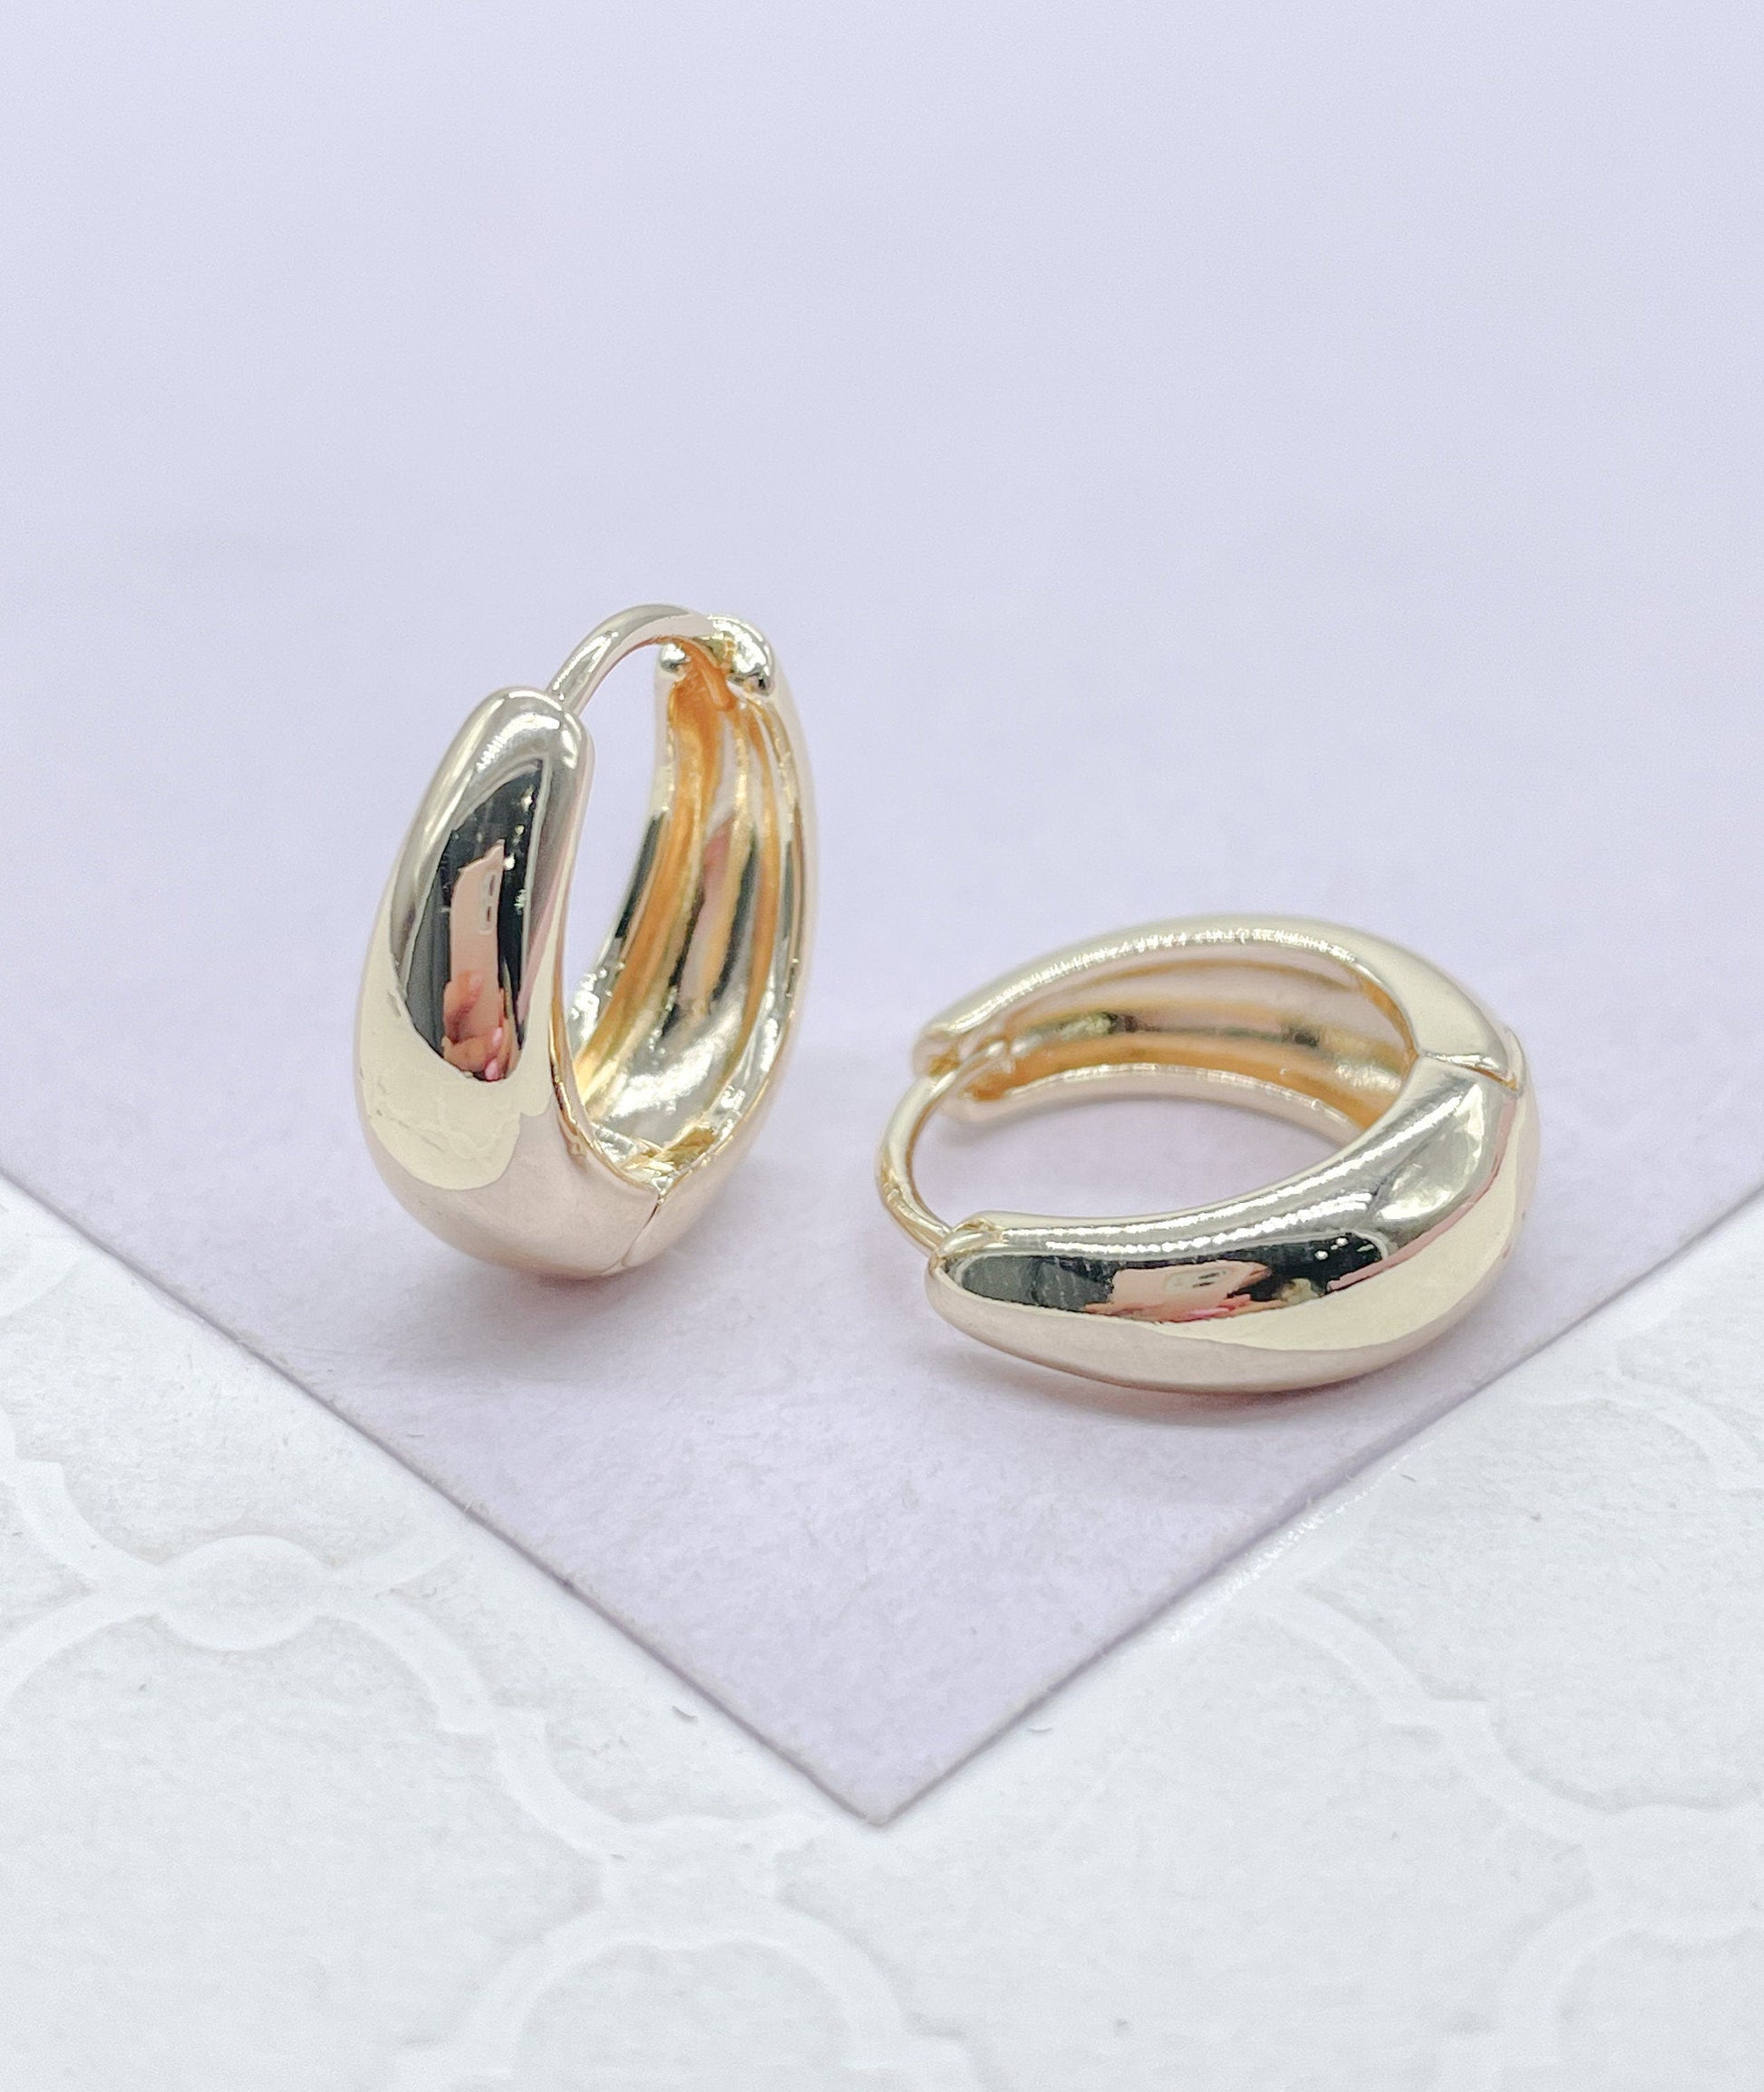 18k Gold Filled Oval Shape Smooth Plain Huggie Hoop Earring Available in 2 Sizes